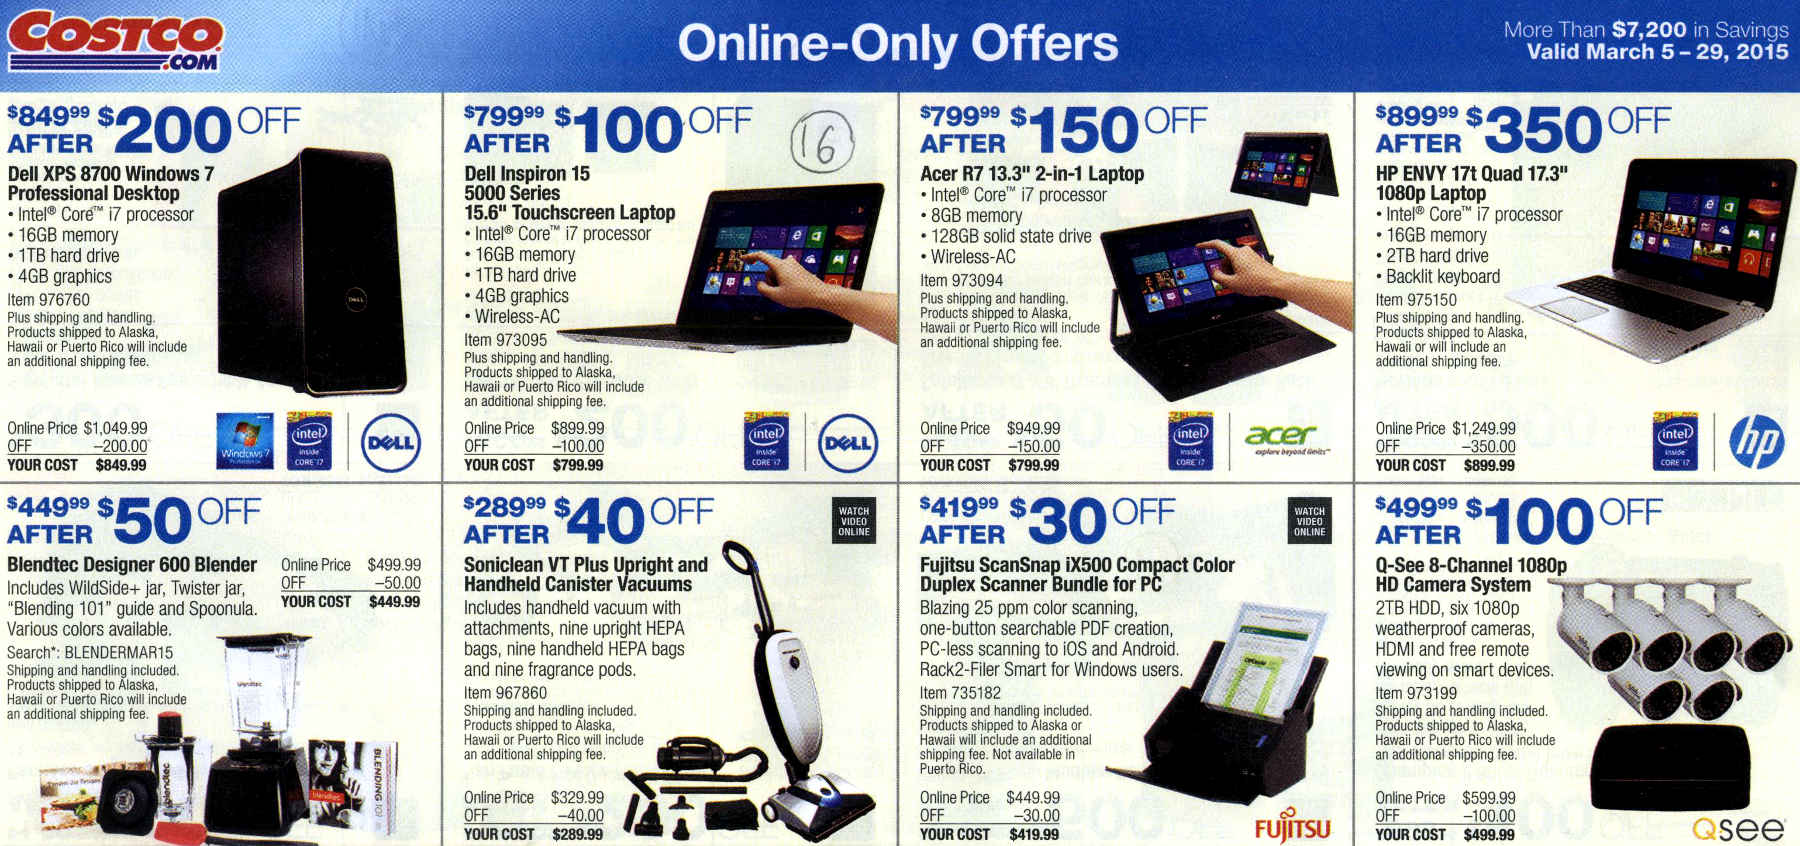 Coupon book full size page -> 16 <-